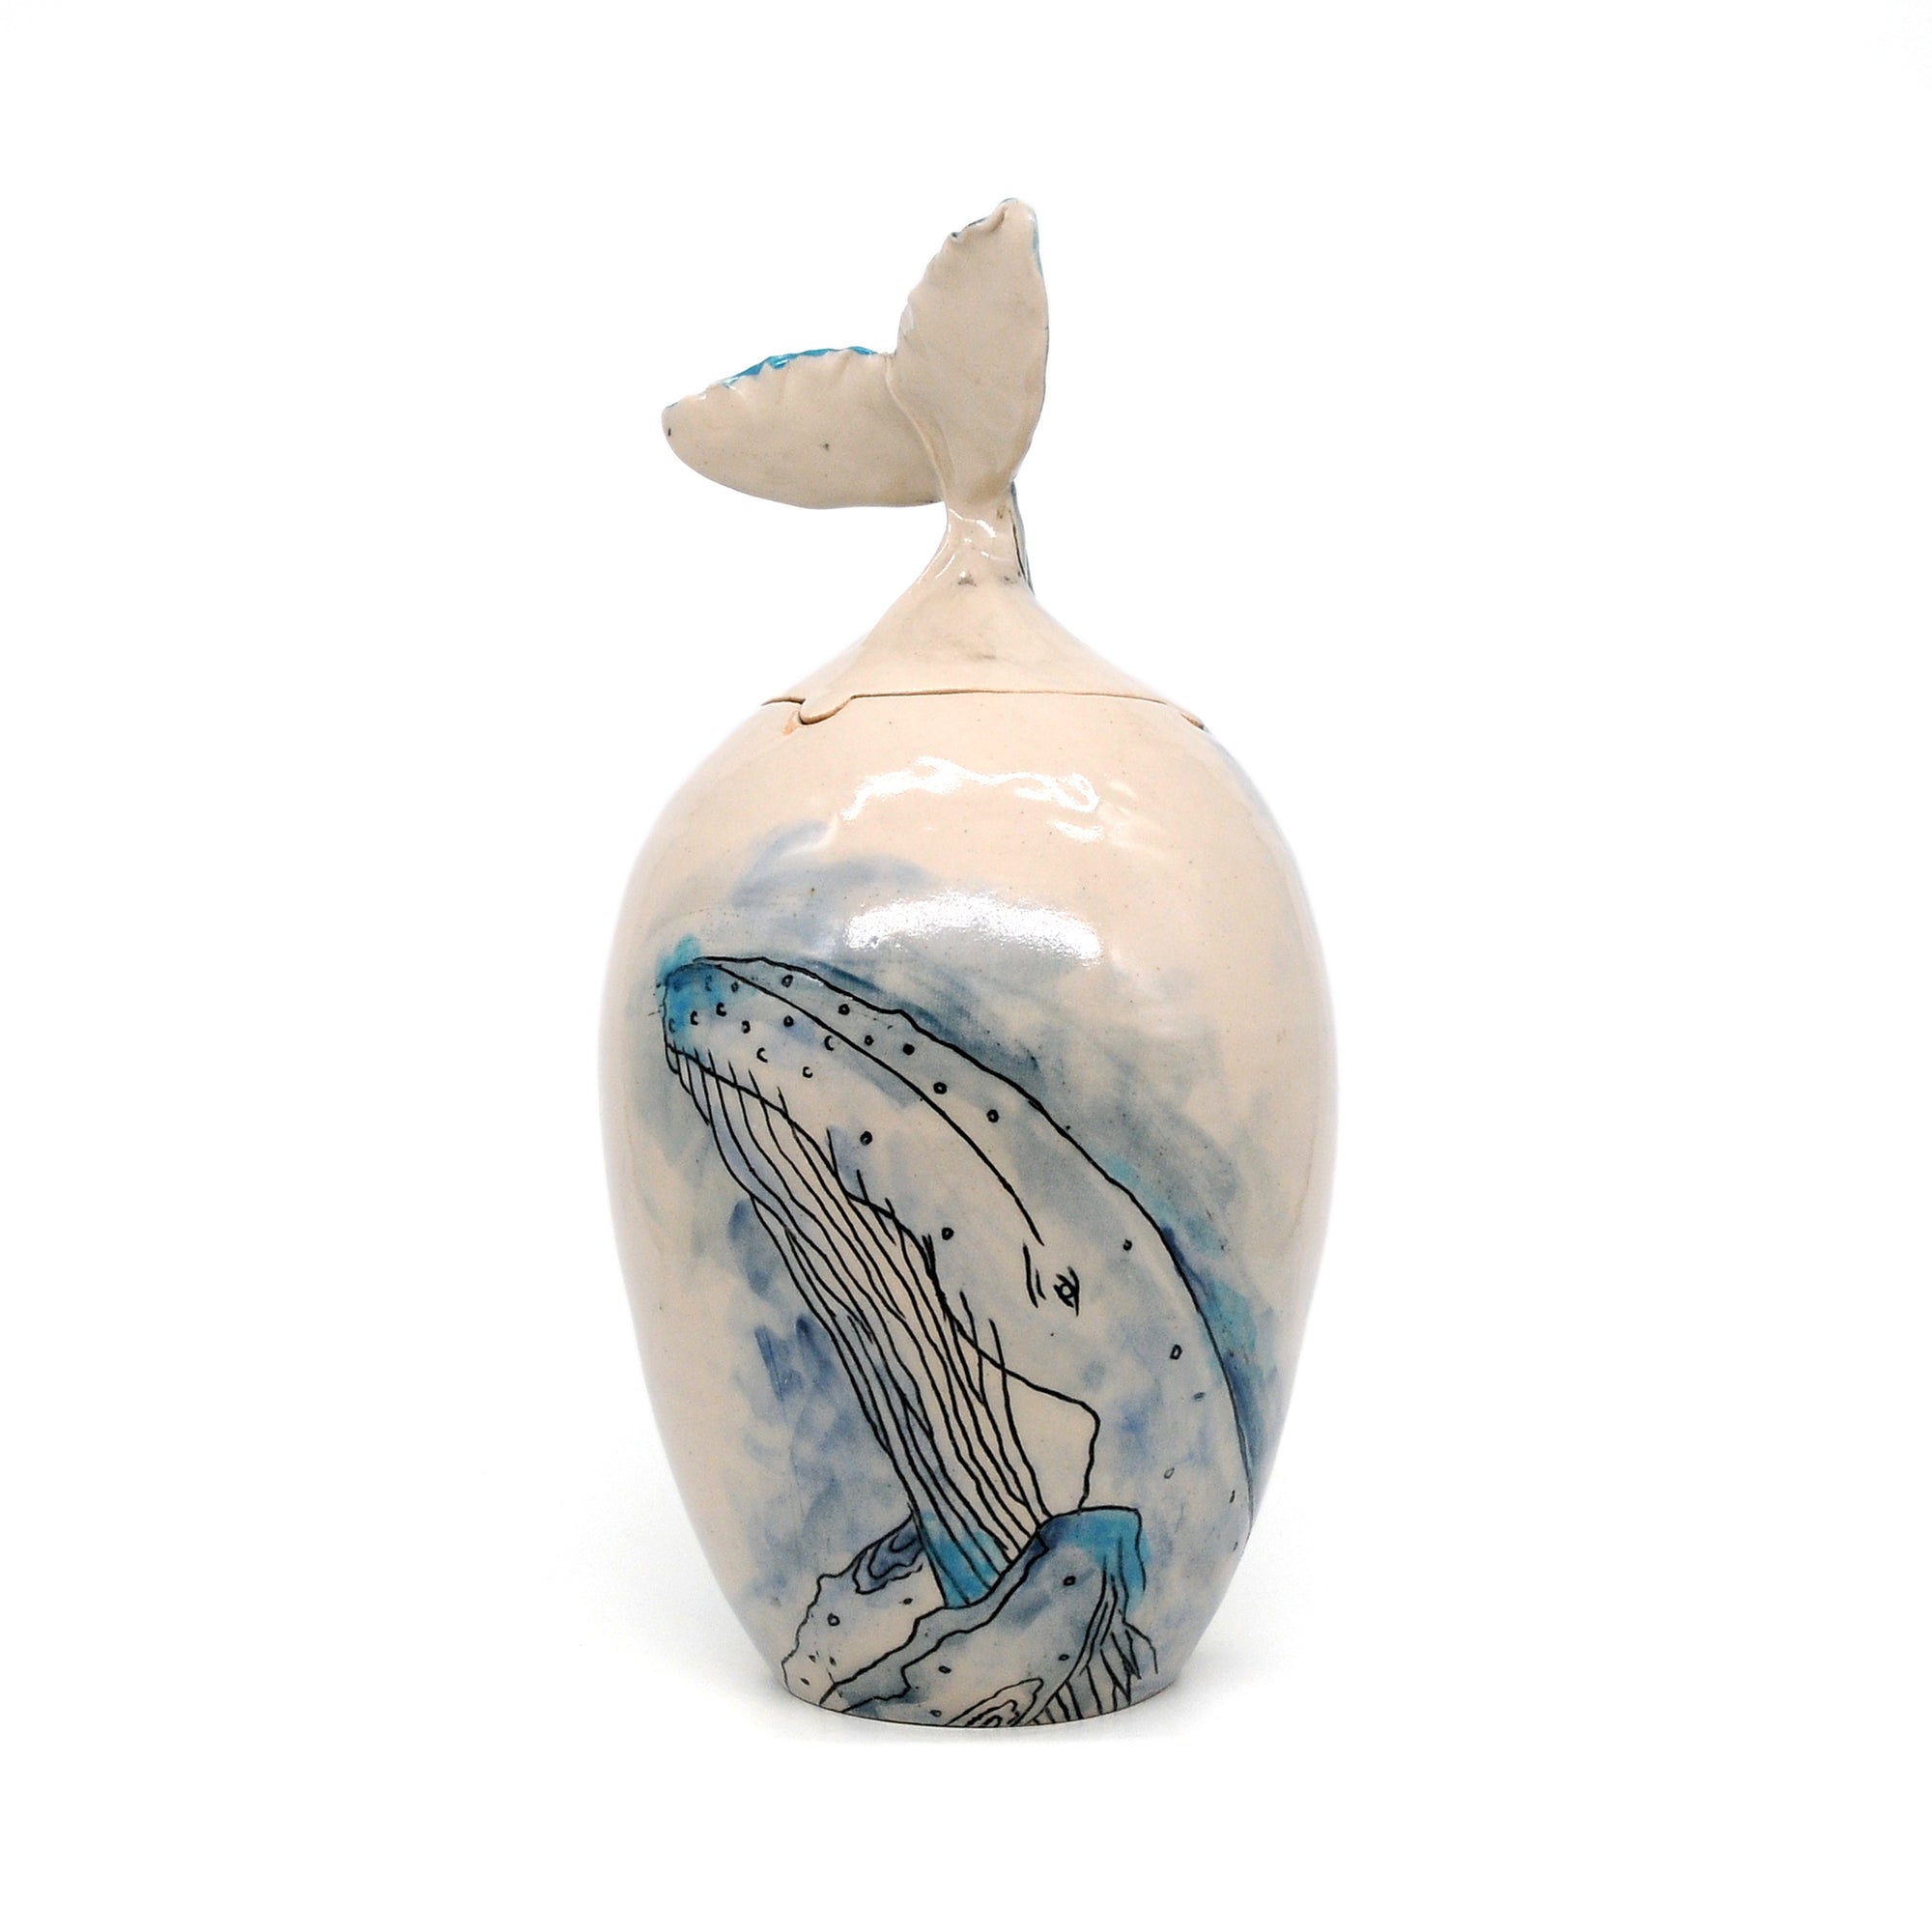 'MK19 Whale’ by Miae Kim ceramics, available at Padstow Gallery, Cornwall